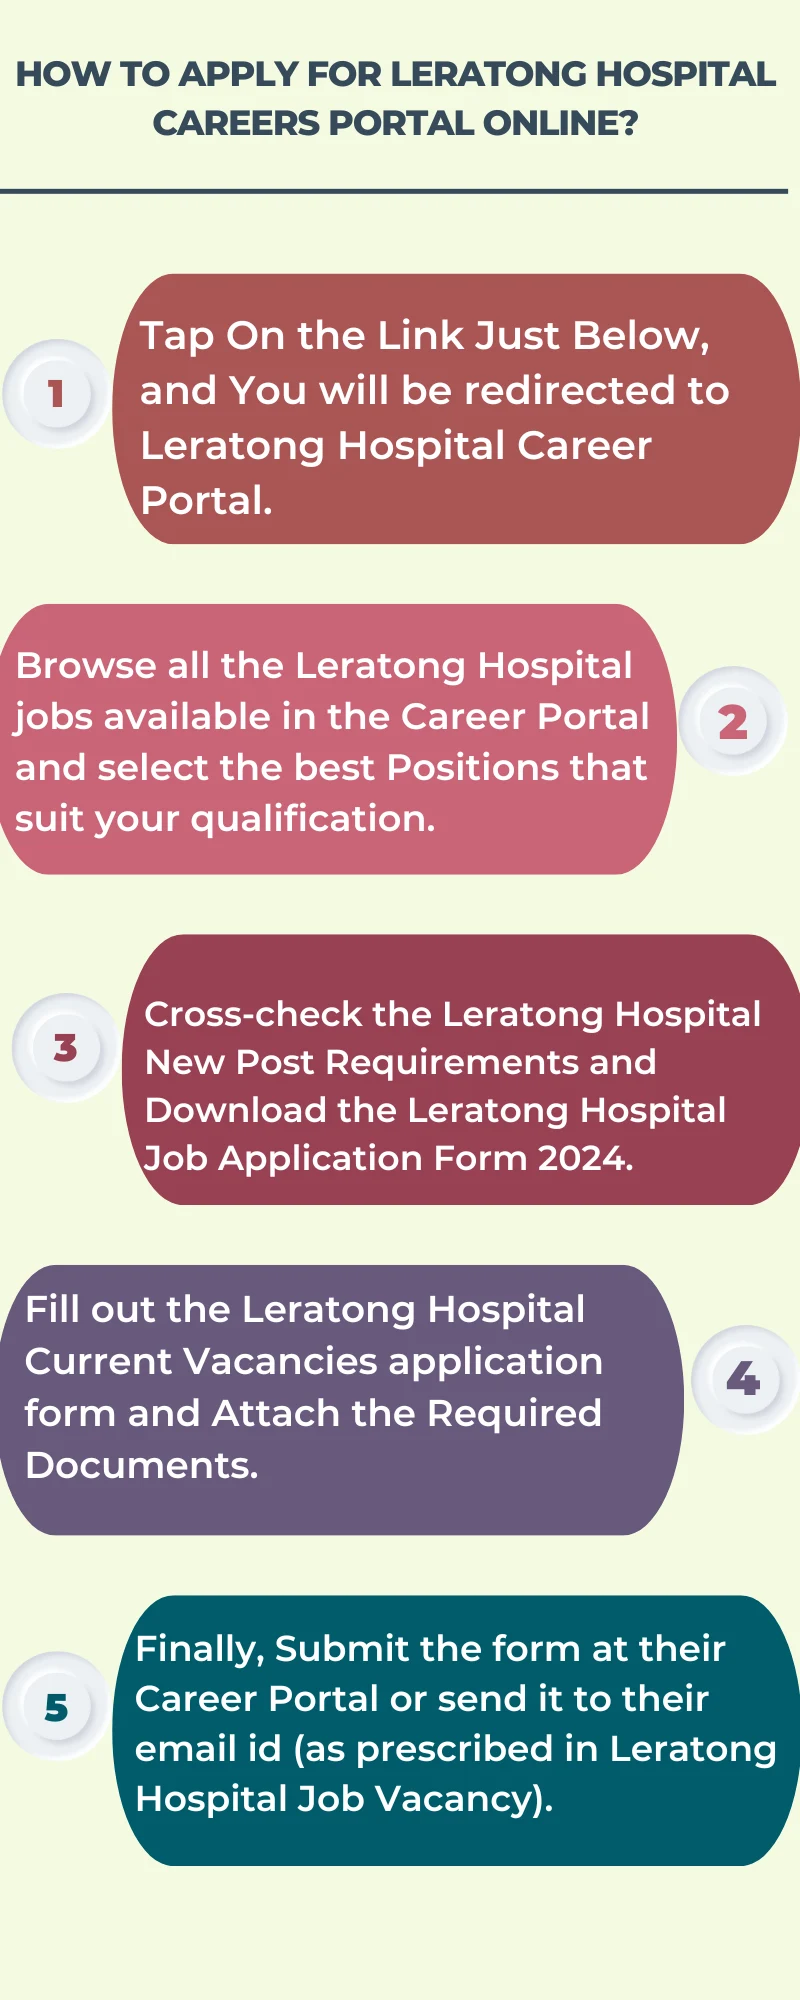 How To Apply for Leratong Hospital Careers Portal Online?